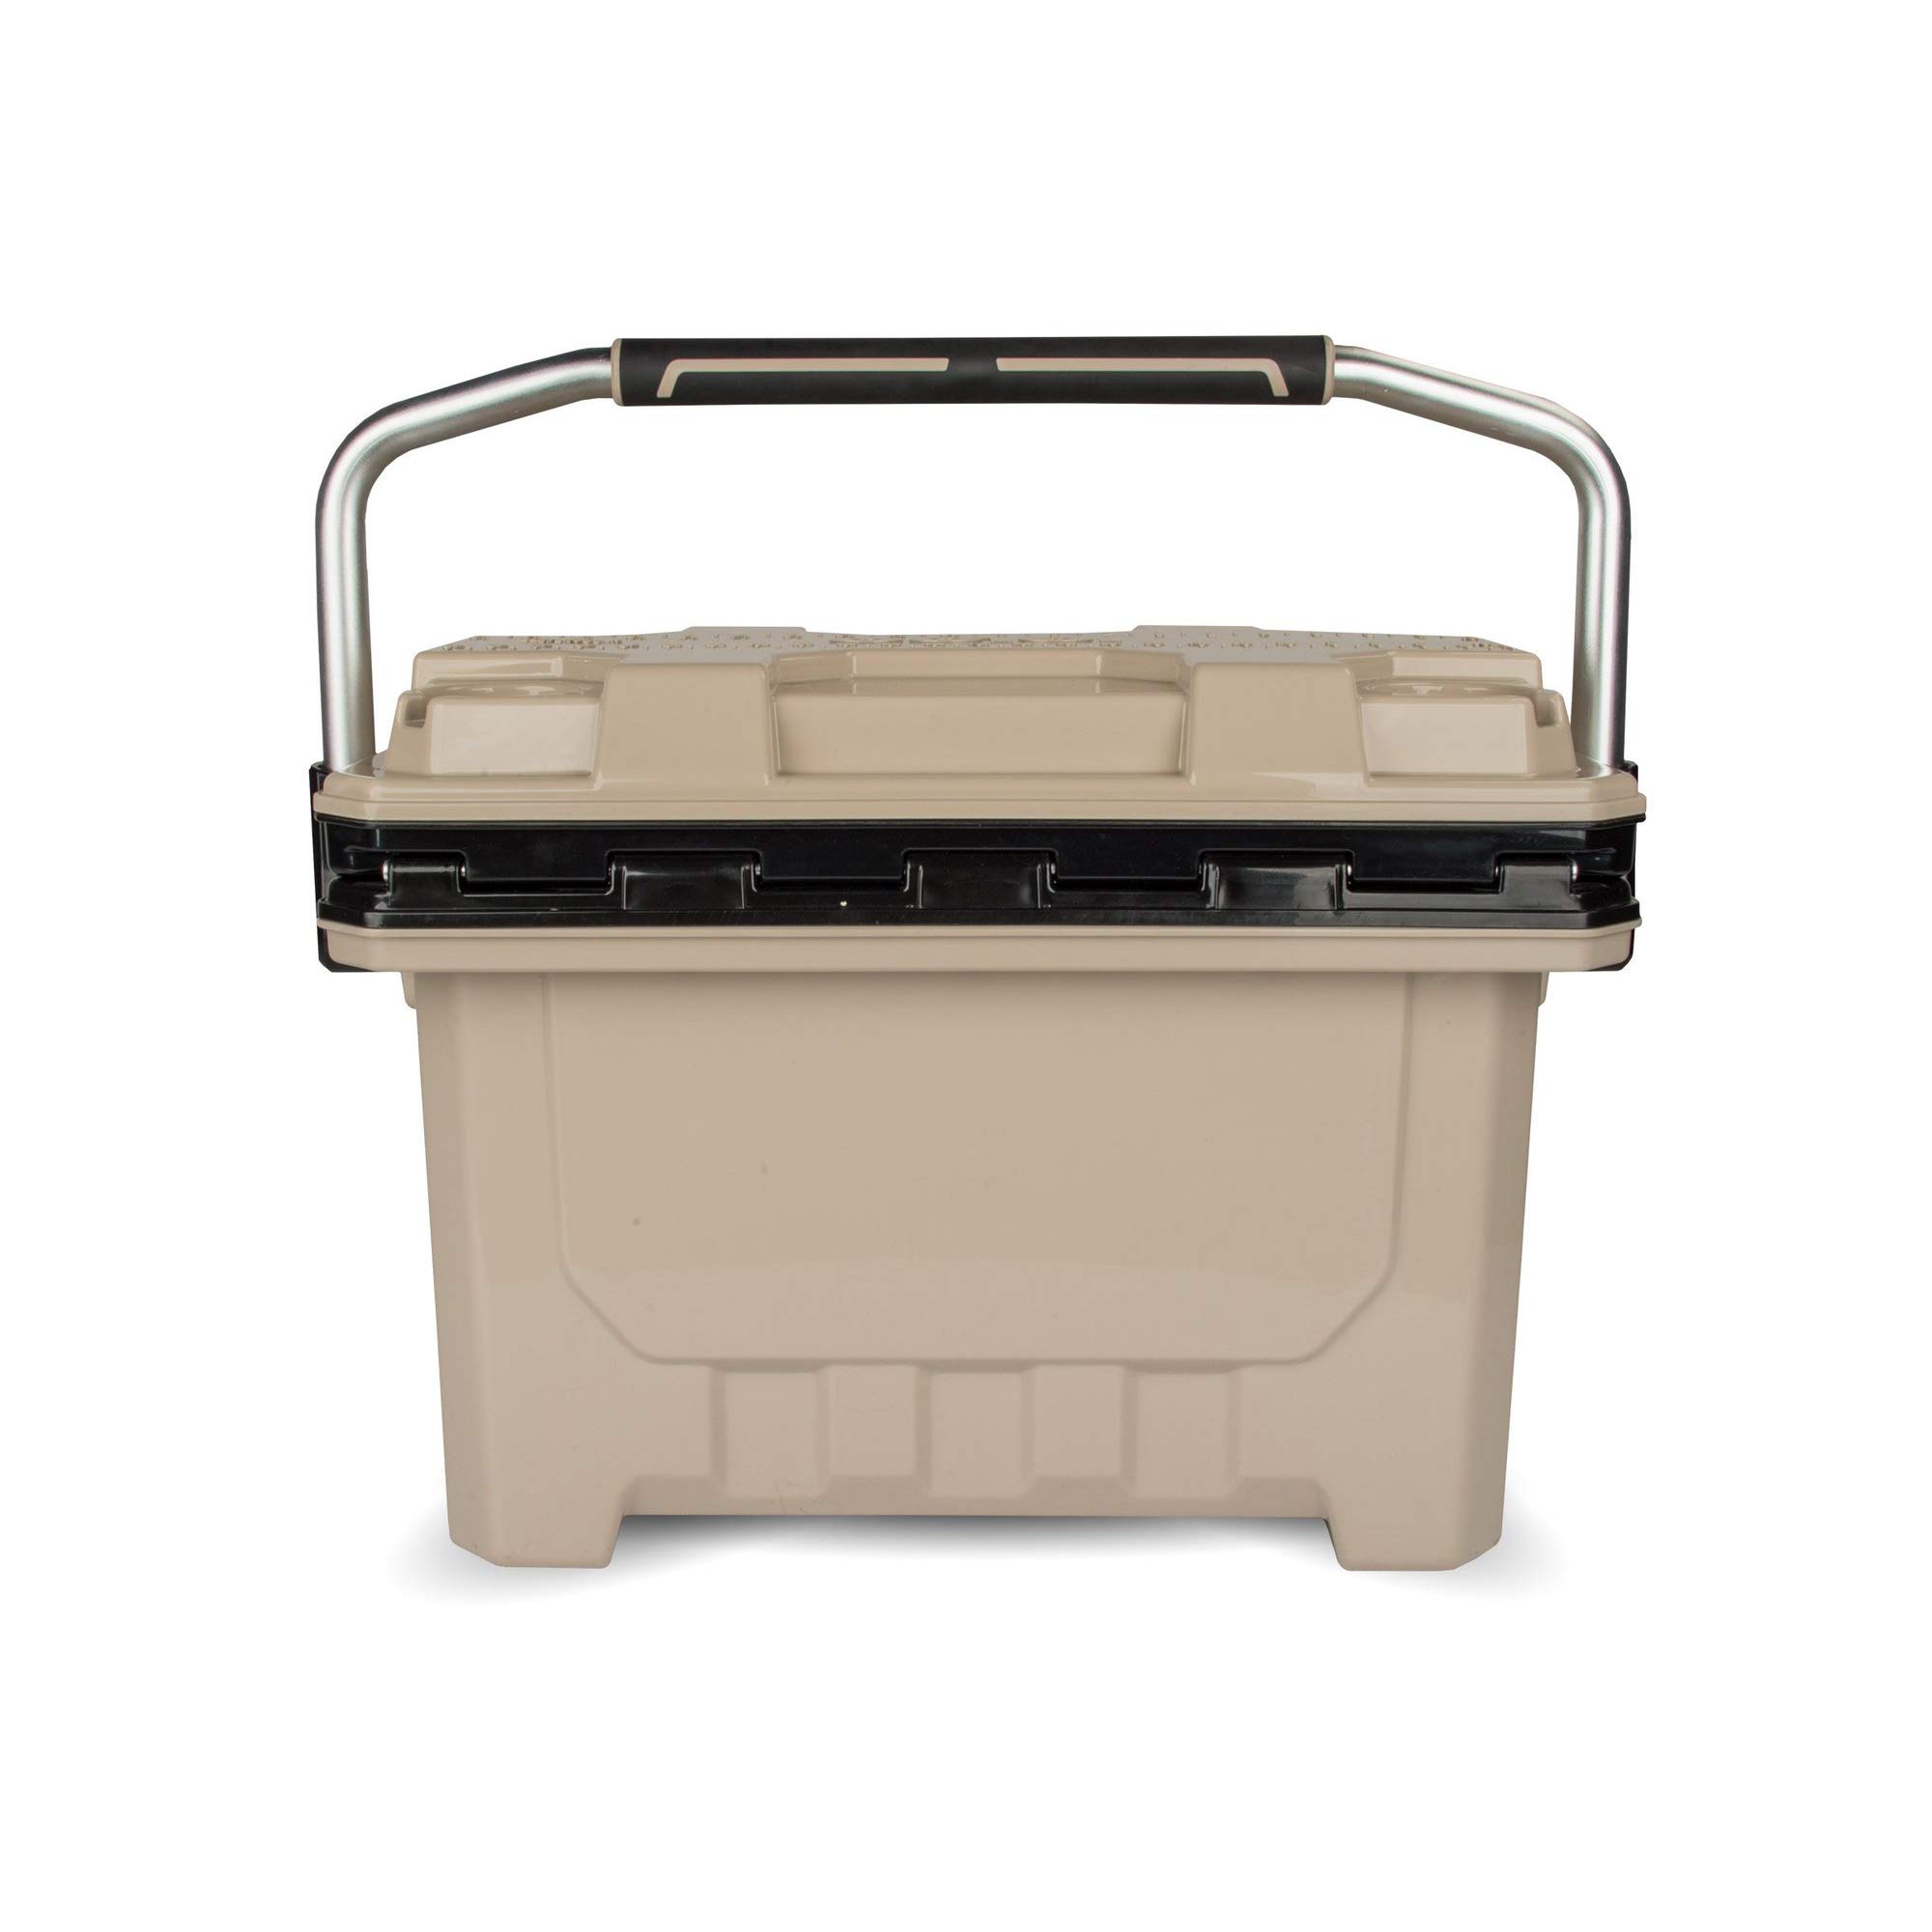 Igloo 24 qt IMX Lockable Insulated Ice Chest Injection Molded Cooler, Tan